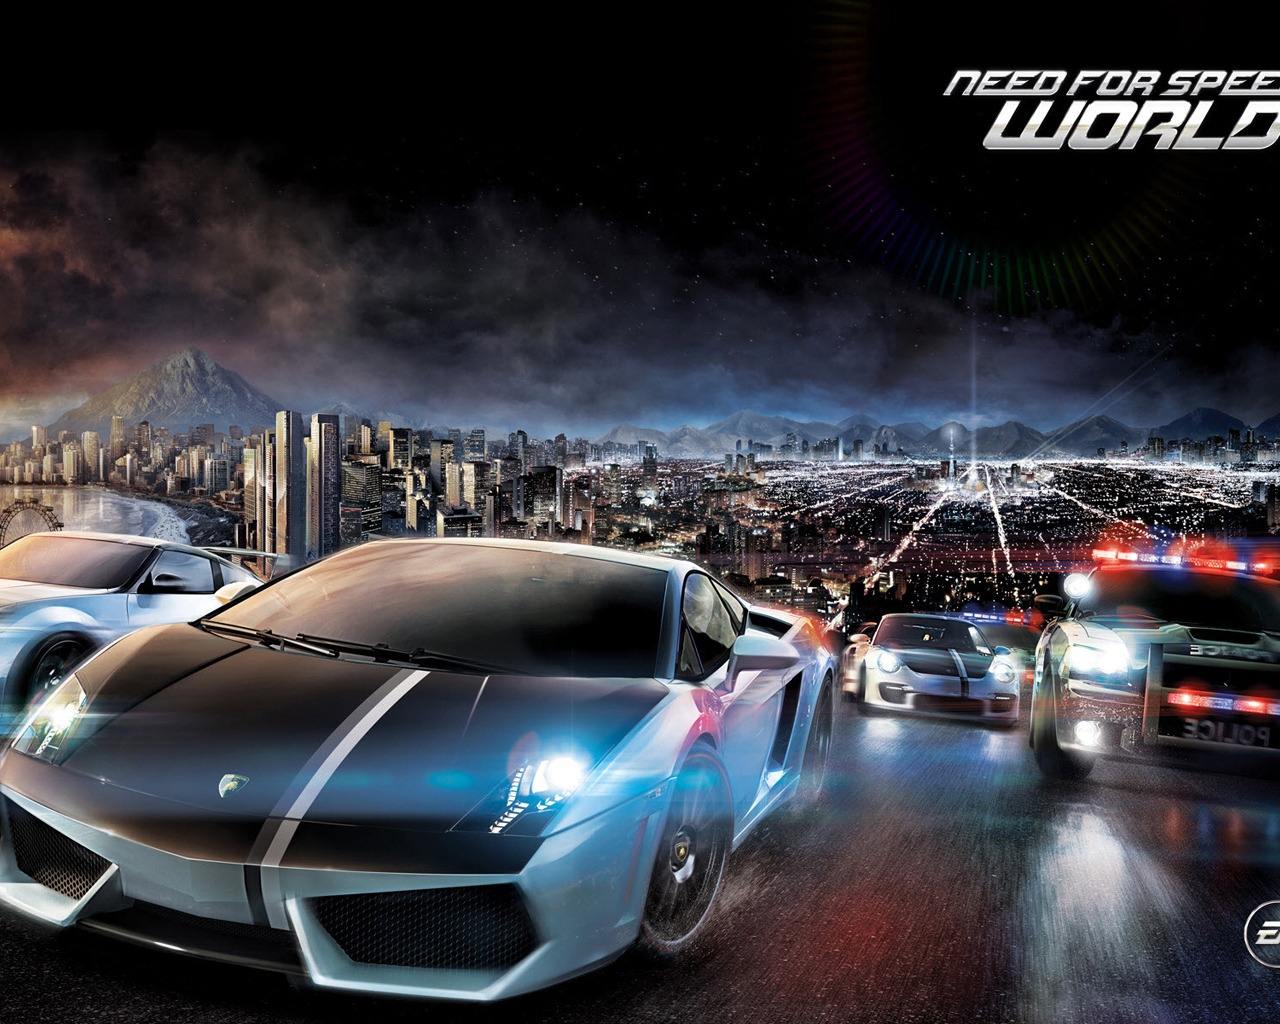 Need for Speed World for 1280 x 1024 resolution